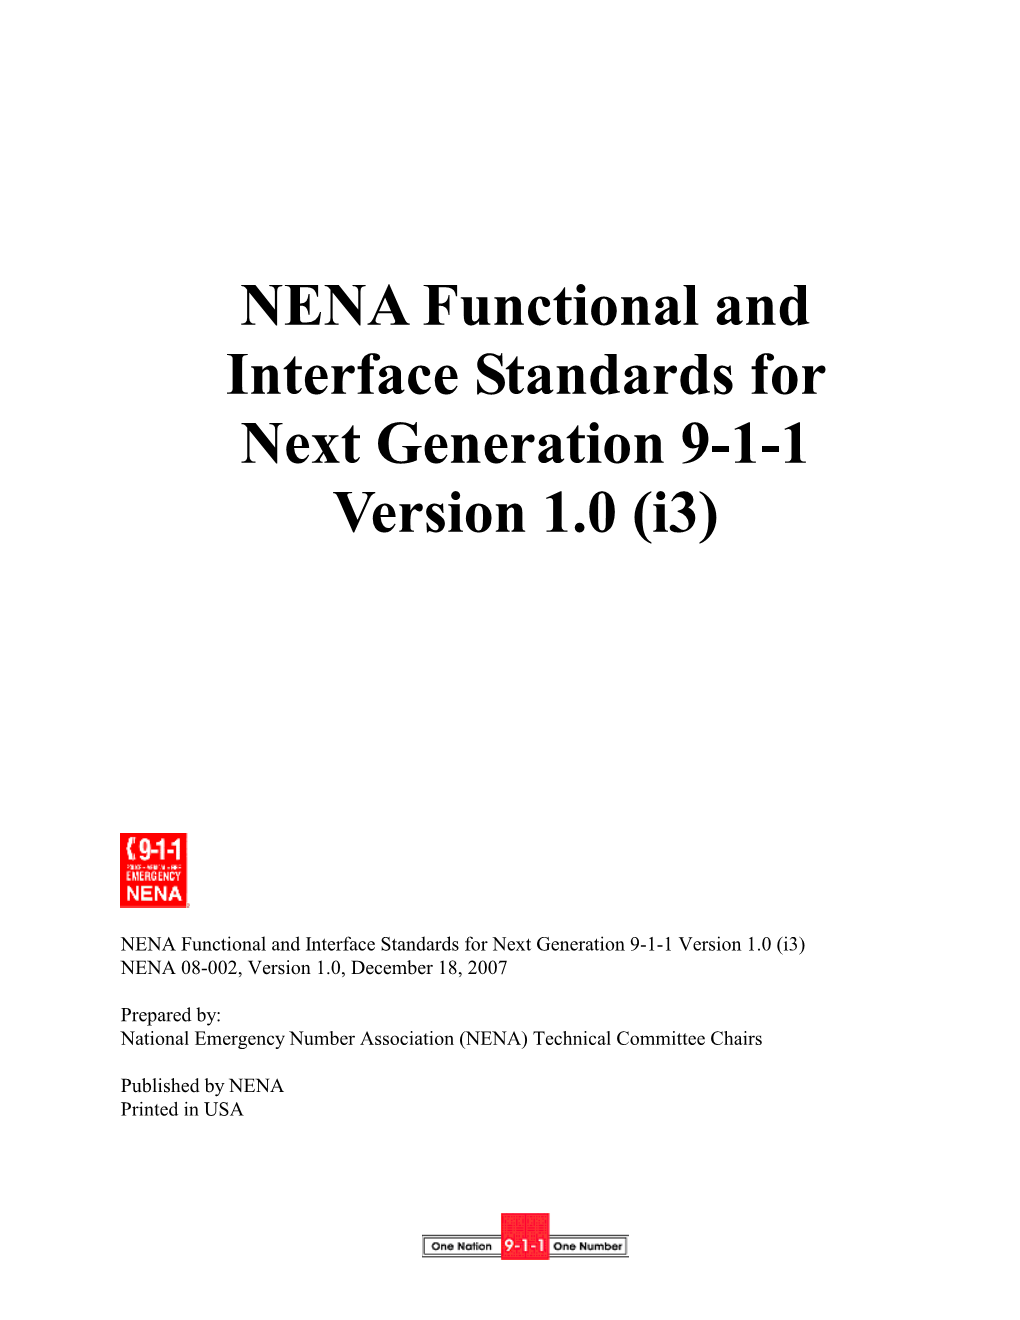 NENA Functional and Interface Standards for Next Generation 9-1-1 Version 1.0 (I3)